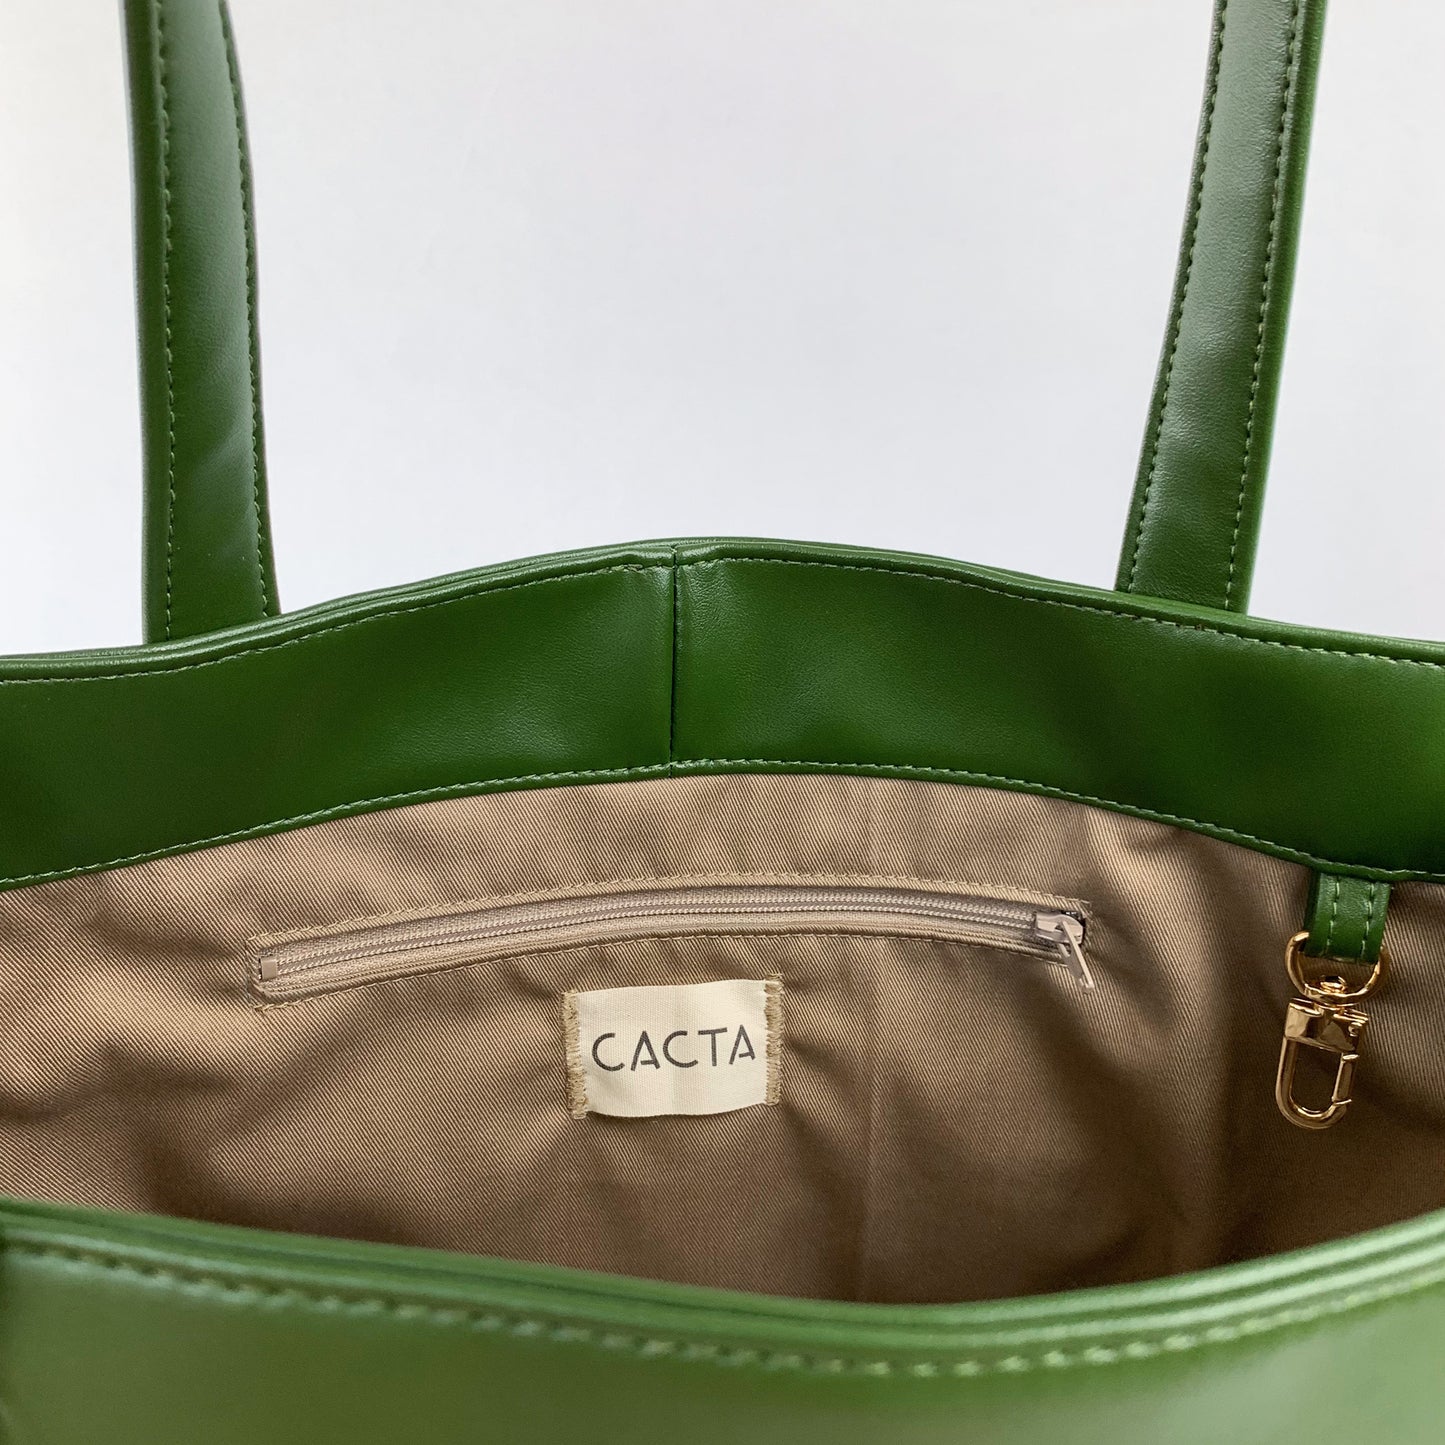 Classic Tote in Agave